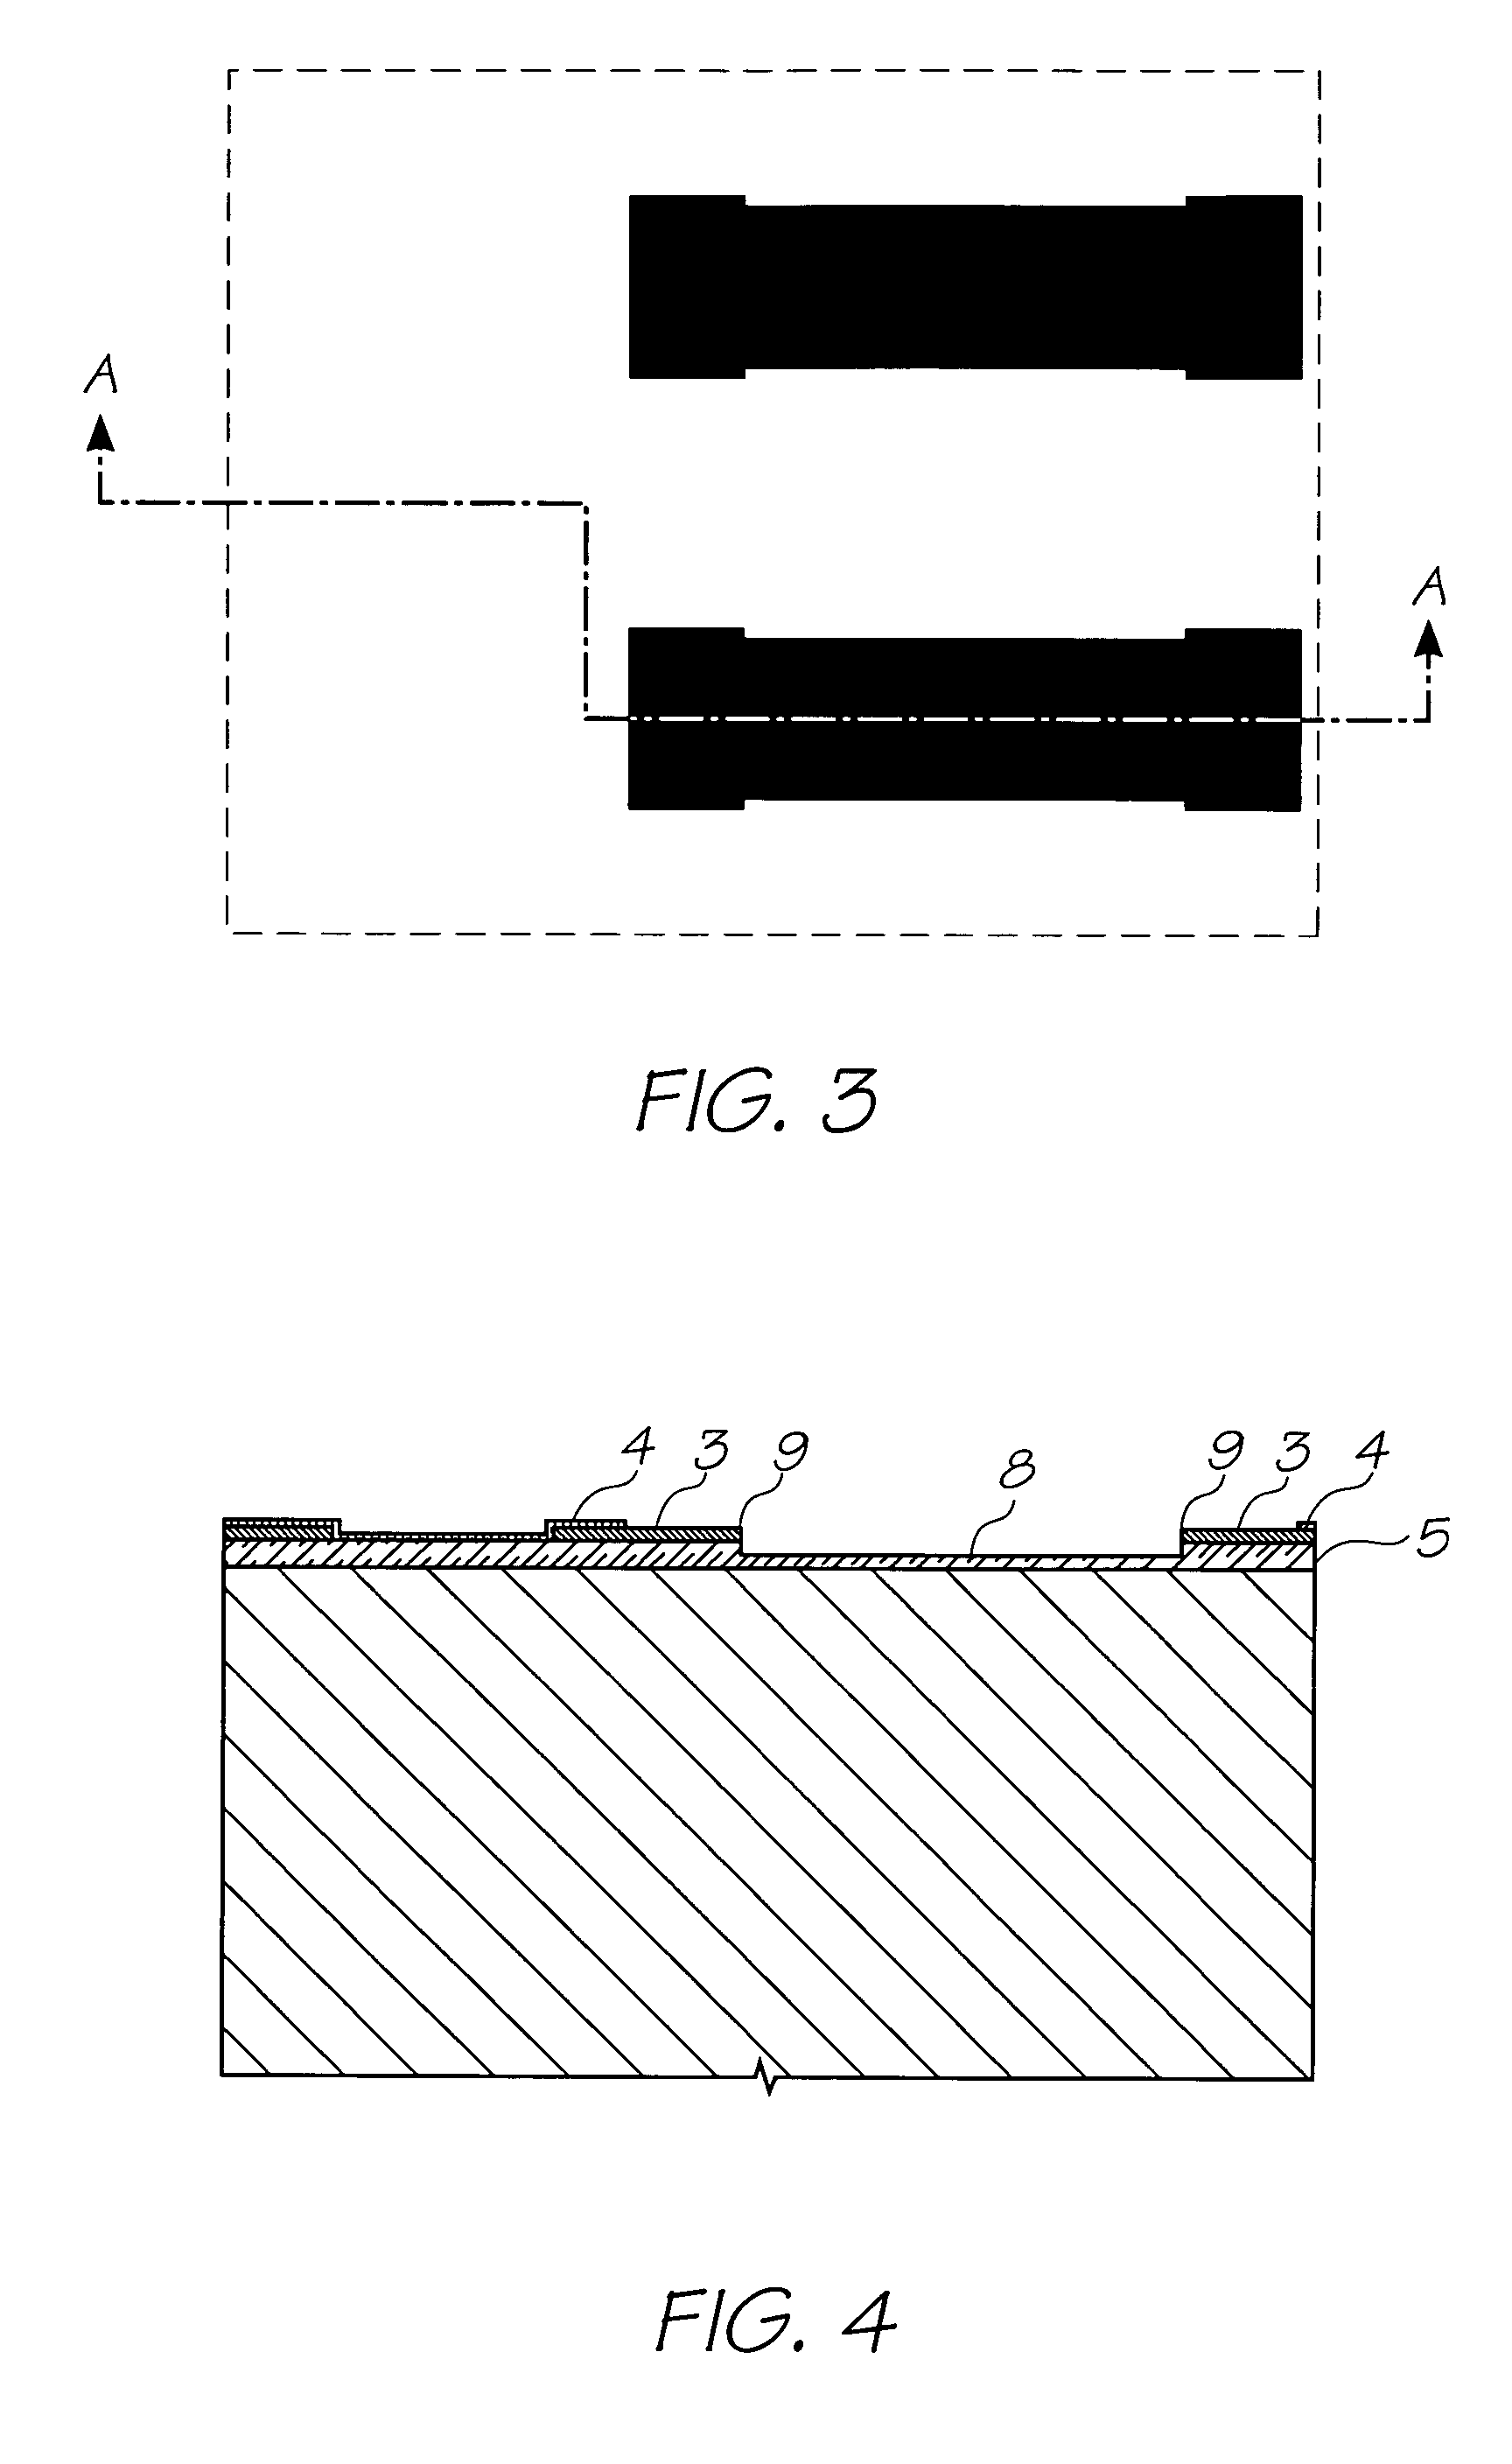 Inkjet printhead with multiple heater elements and cross bracing